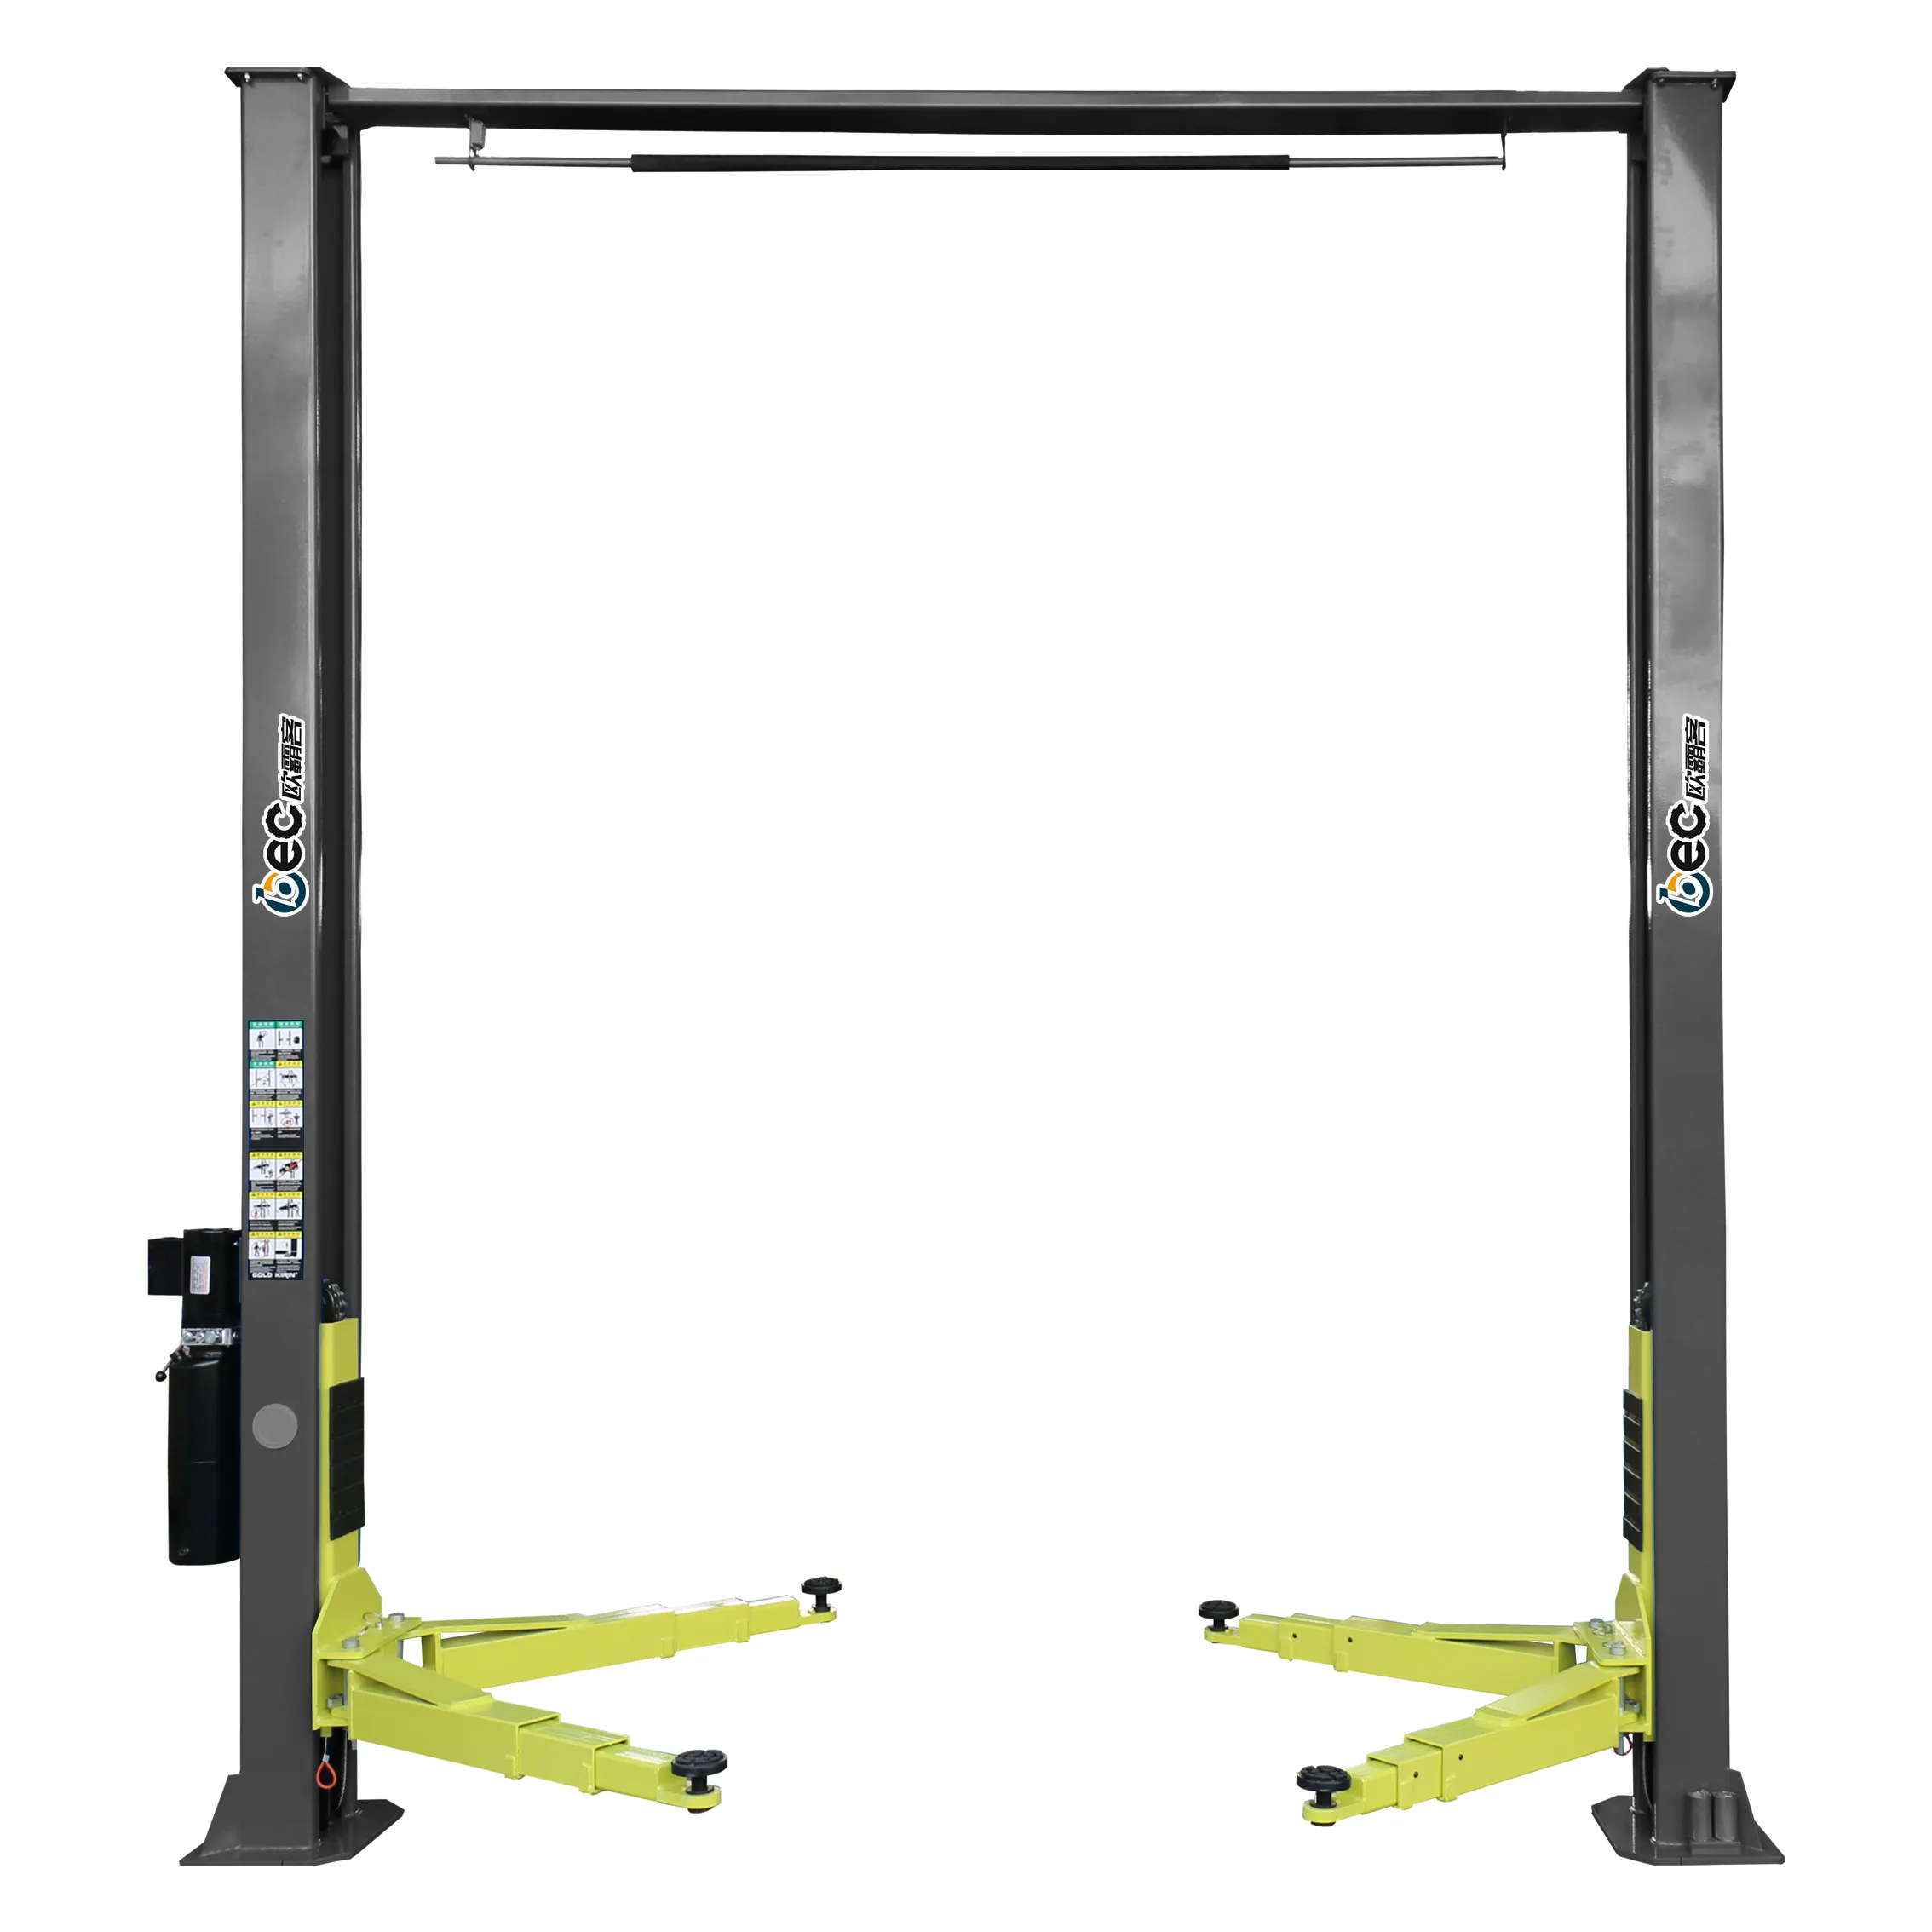 Hot sale 2 post car lift automotive shop equipment from China factory hydraulic 2 post car parking lift